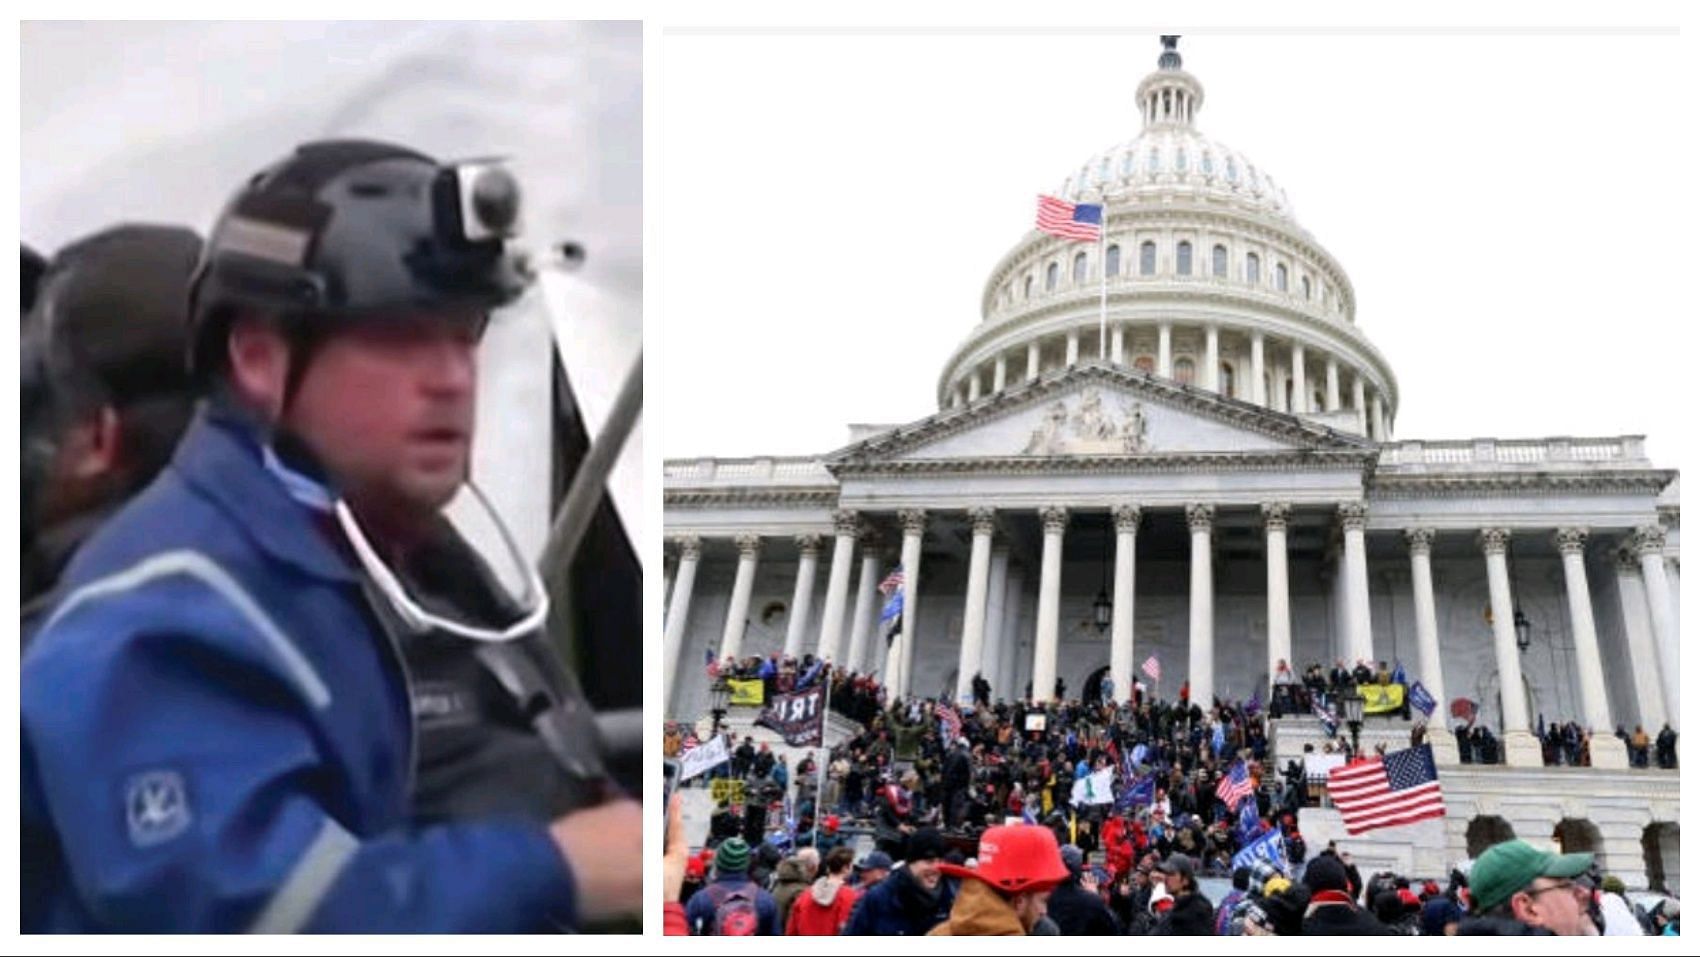 Guy Reffitt was involved in the January 6, 2021 Capitol riots (Photo via Getty Images)